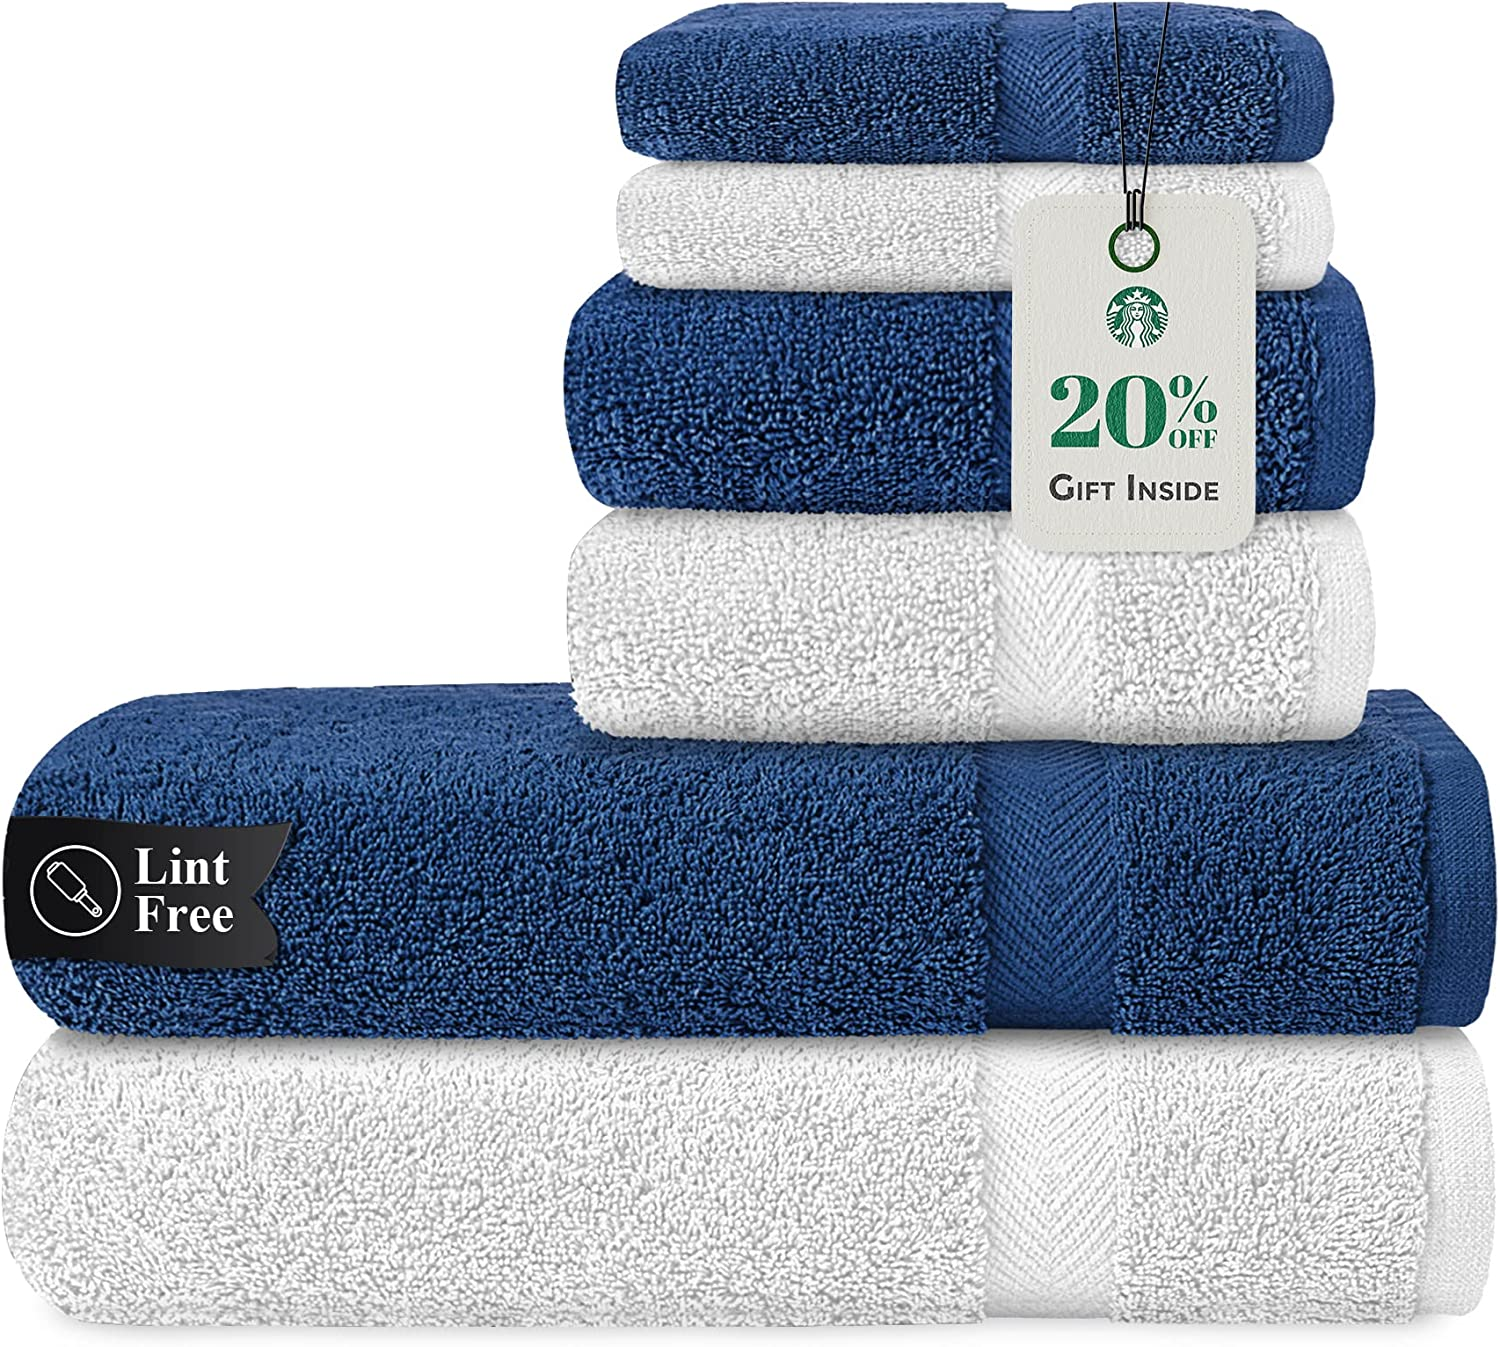 Stony Edge Towel Set, 2 Bath Towel, 2 Hand Towel & 2 Face Towels, 100% Cotton, 600 GSM, Soft & Absorbent for Bathroom, Kitchen, Gym & Spa, White & Gray